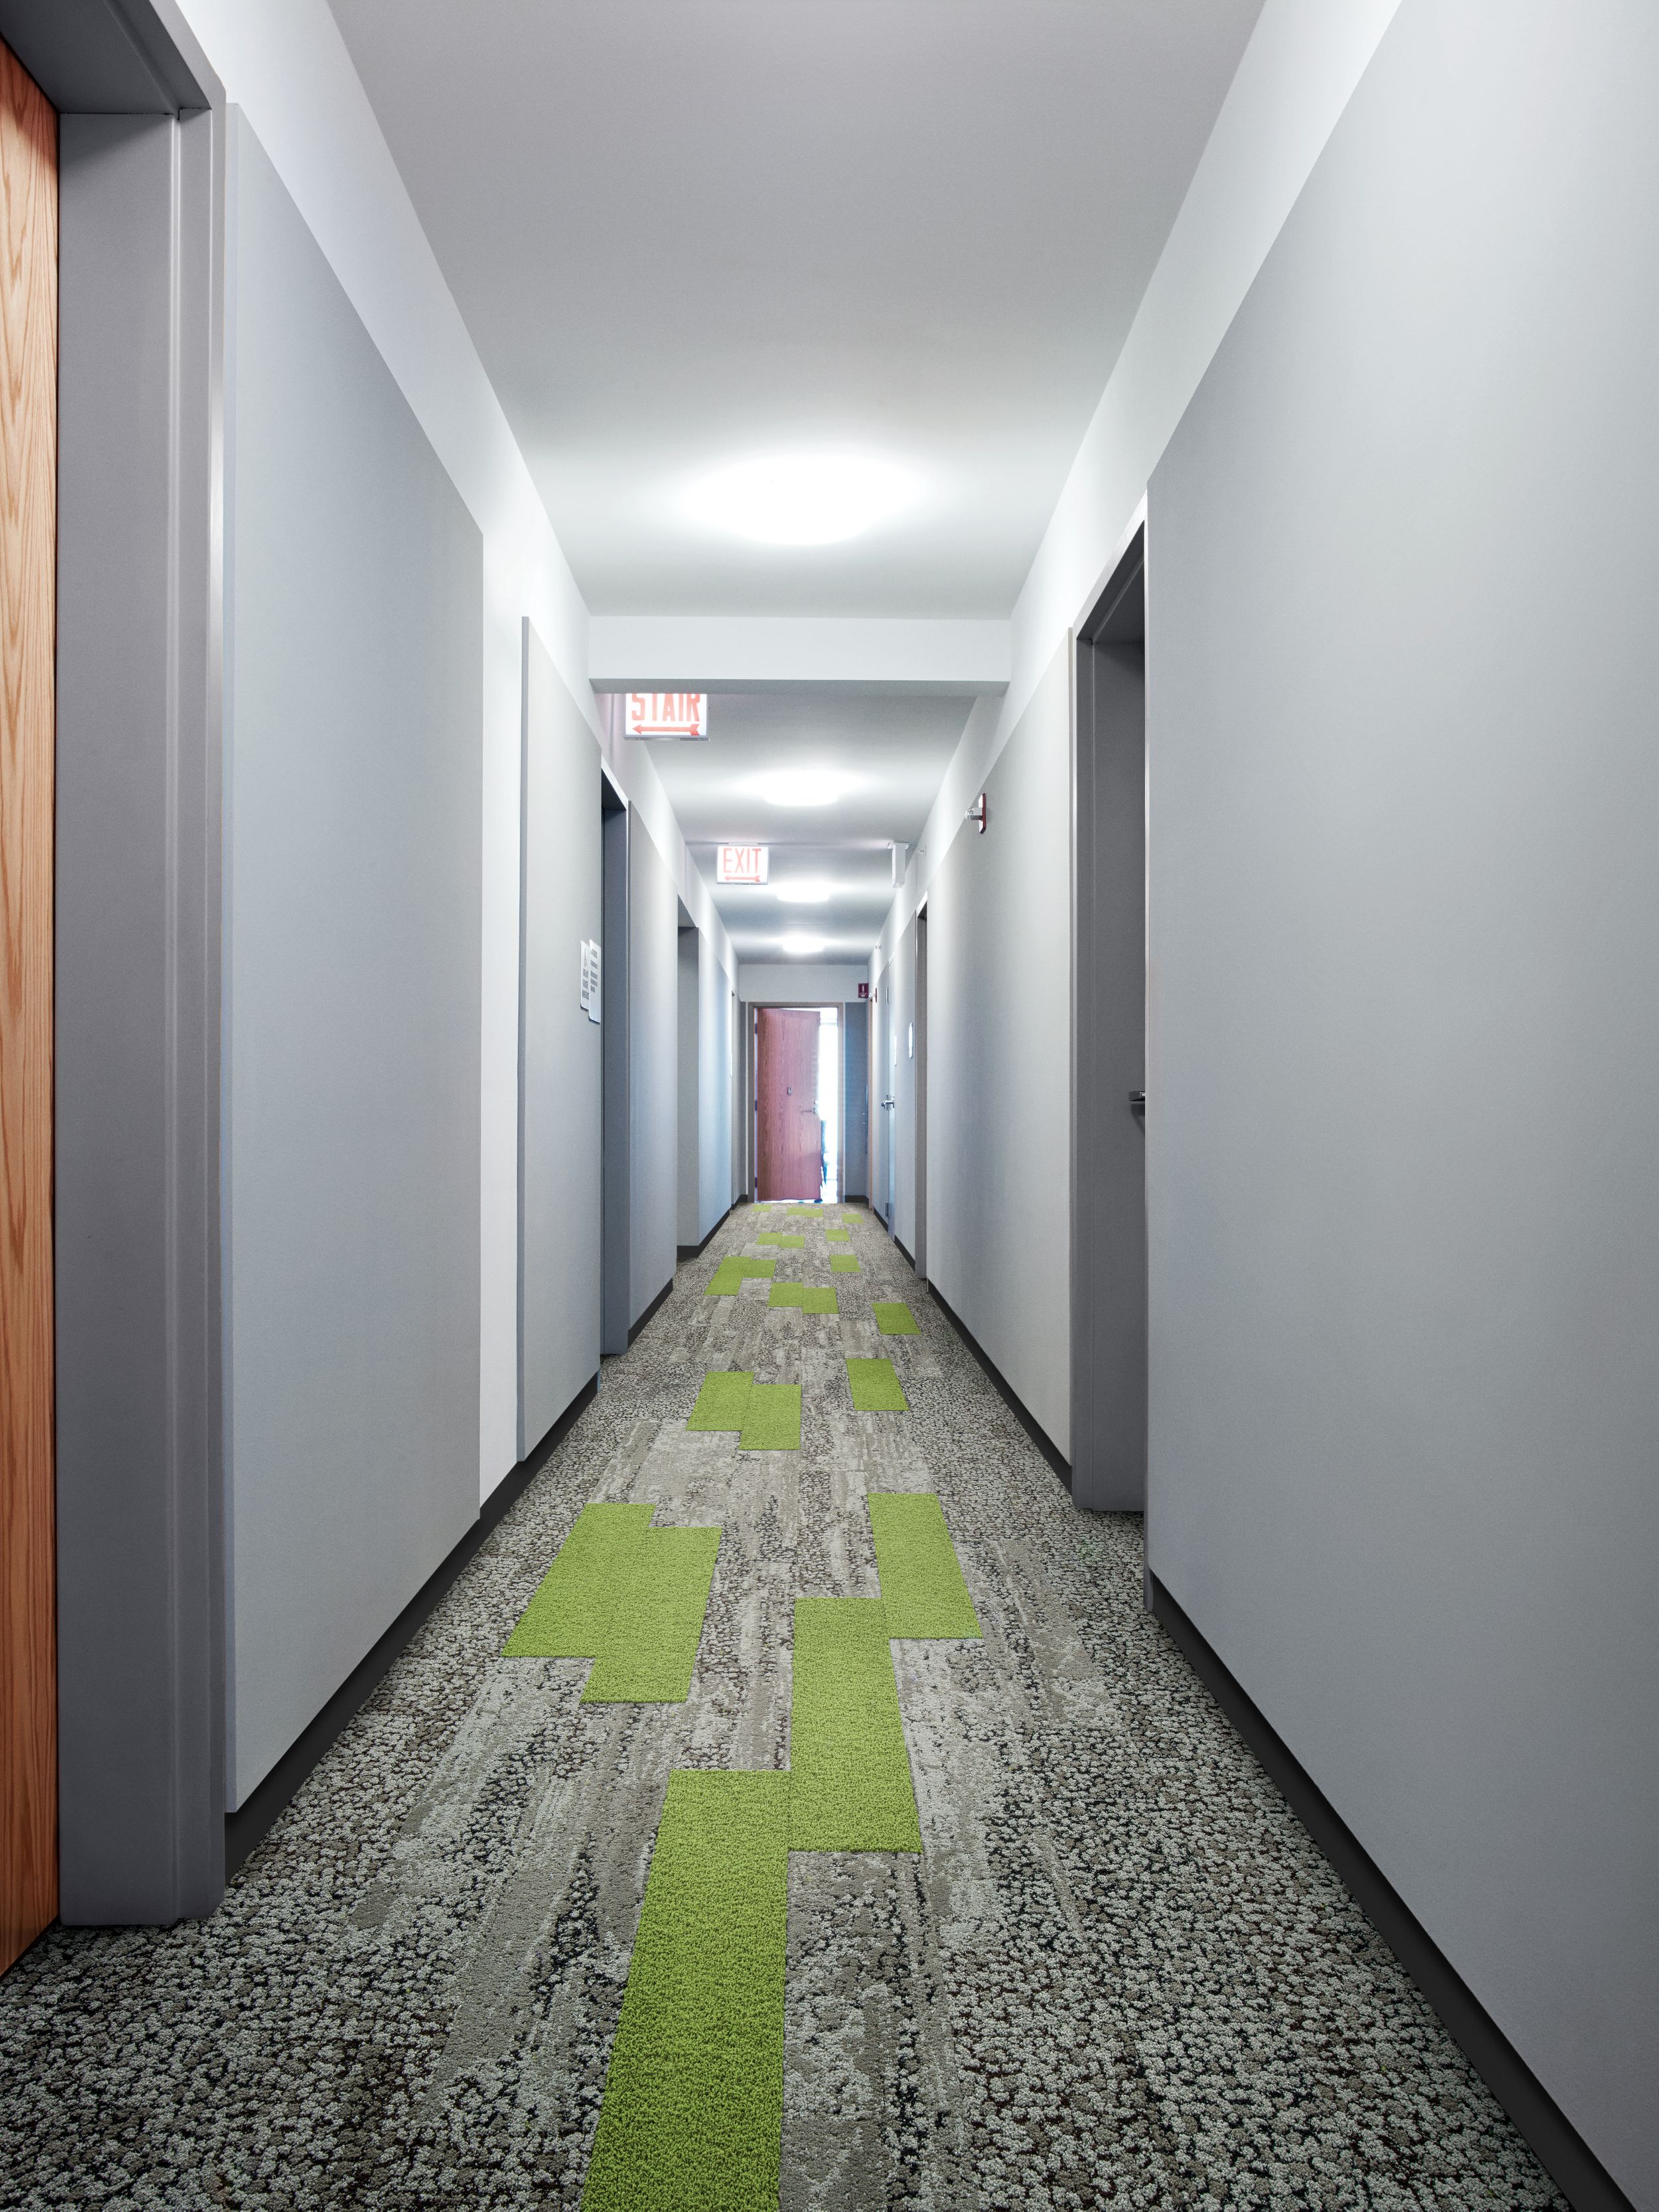 Interface HN830 and HN850 plank carpet tiles in long corridor with mutliple doors and wood door at end image number 2